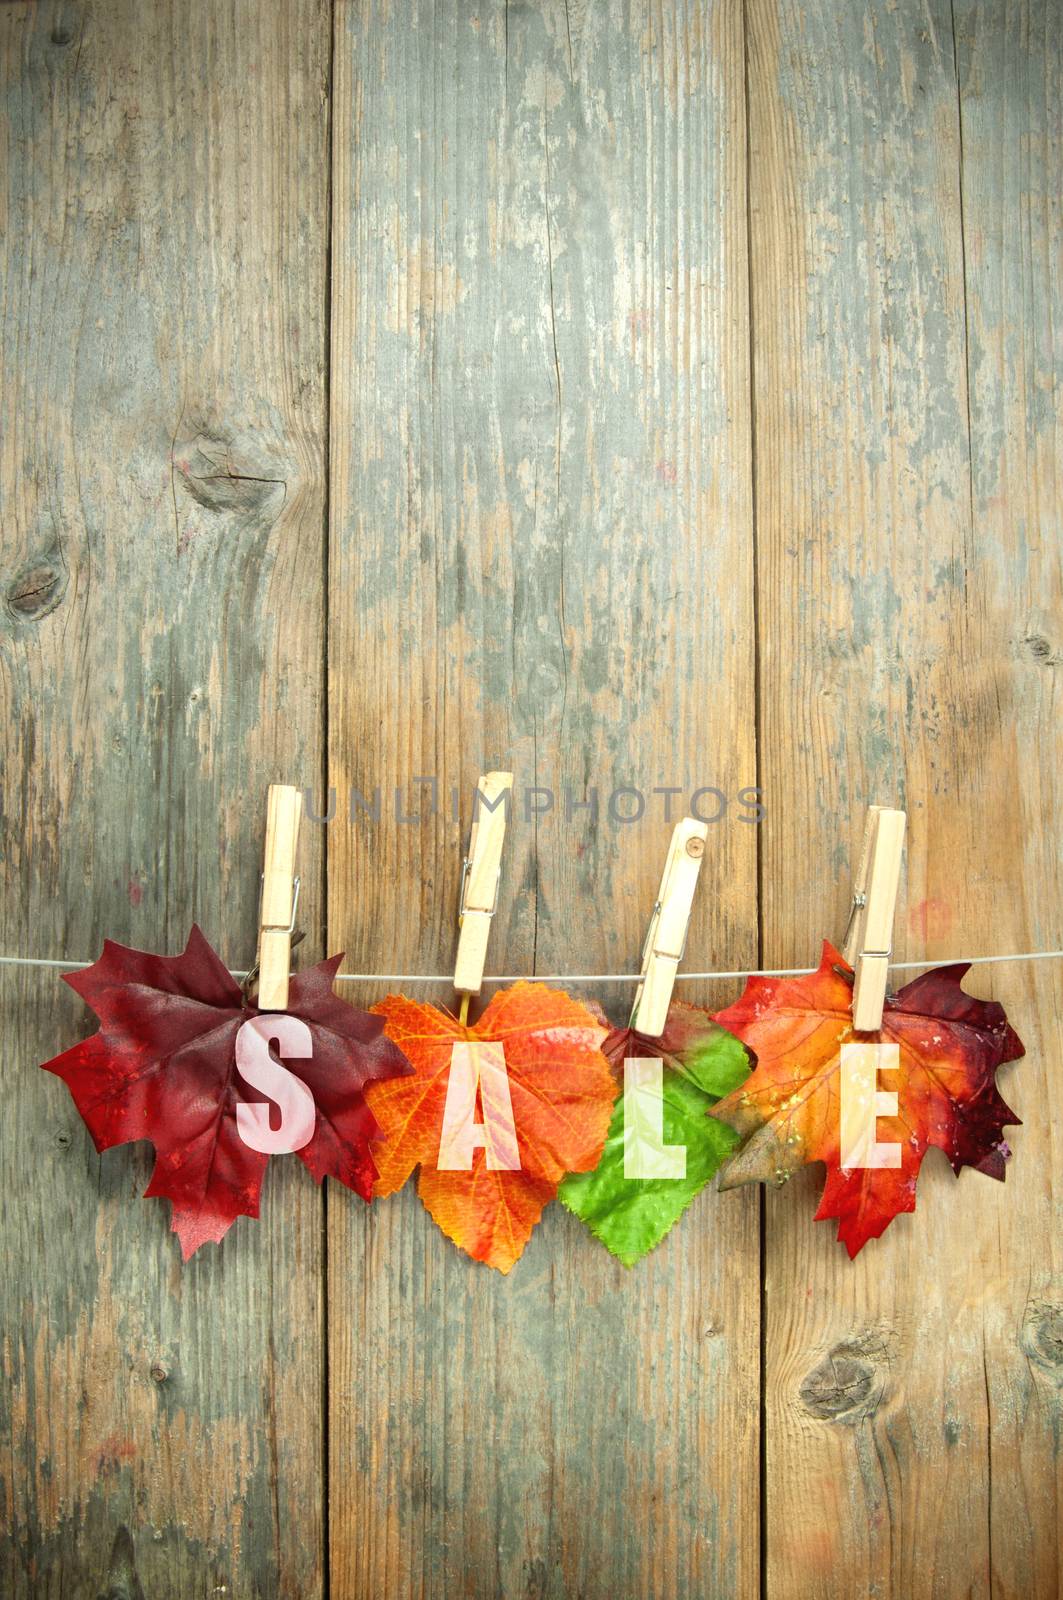 Autumn sales leaves hanging on a clothes line with pegs against a wooden background